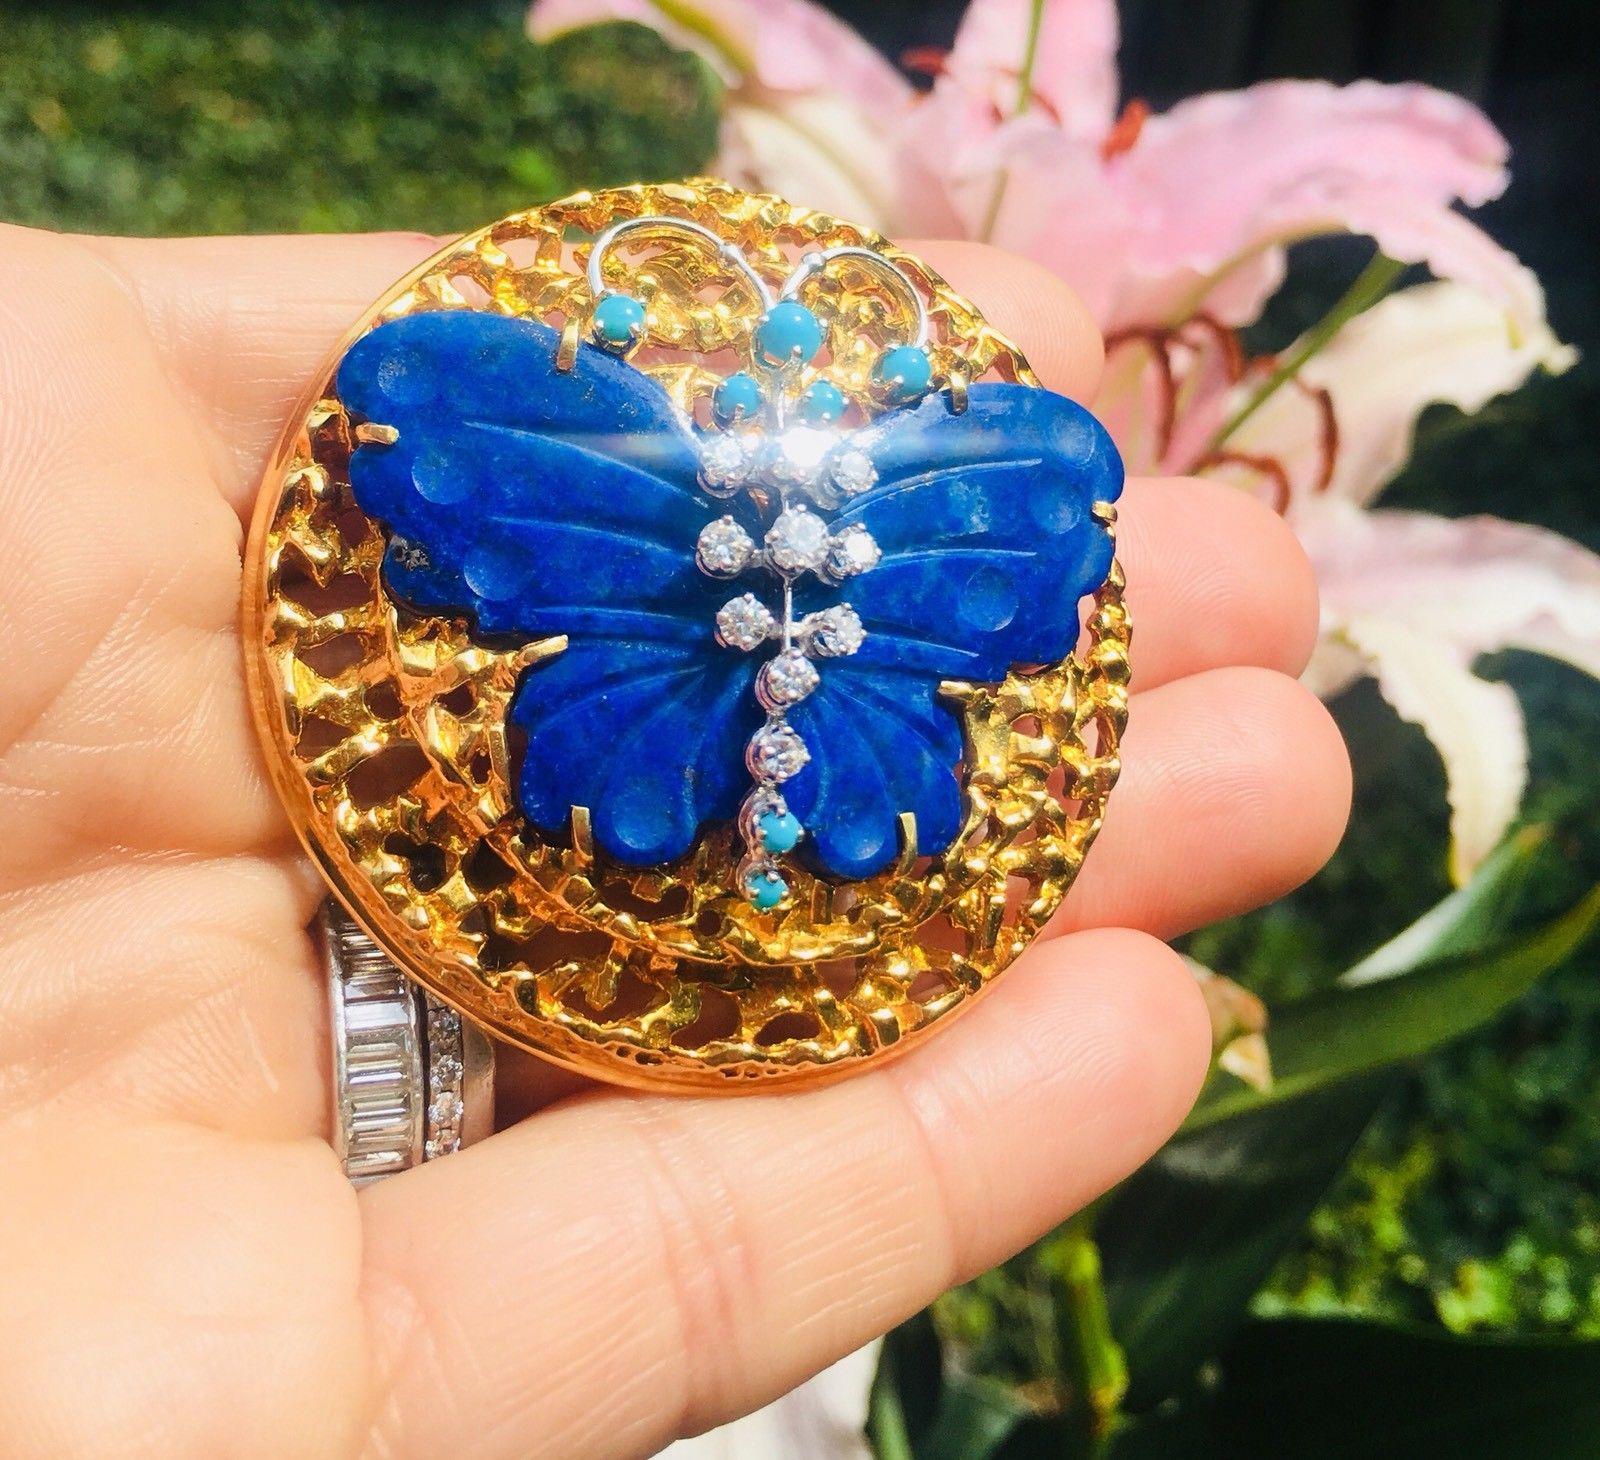 This stunning 18 karat freeform handmade Peter Lindeman carved lapis butterfly pendant and brooch could be used on an omega choker necklace or a long gold chain, or even over pearls or a strand of lapis. The pendant hook is quite large.  Chic